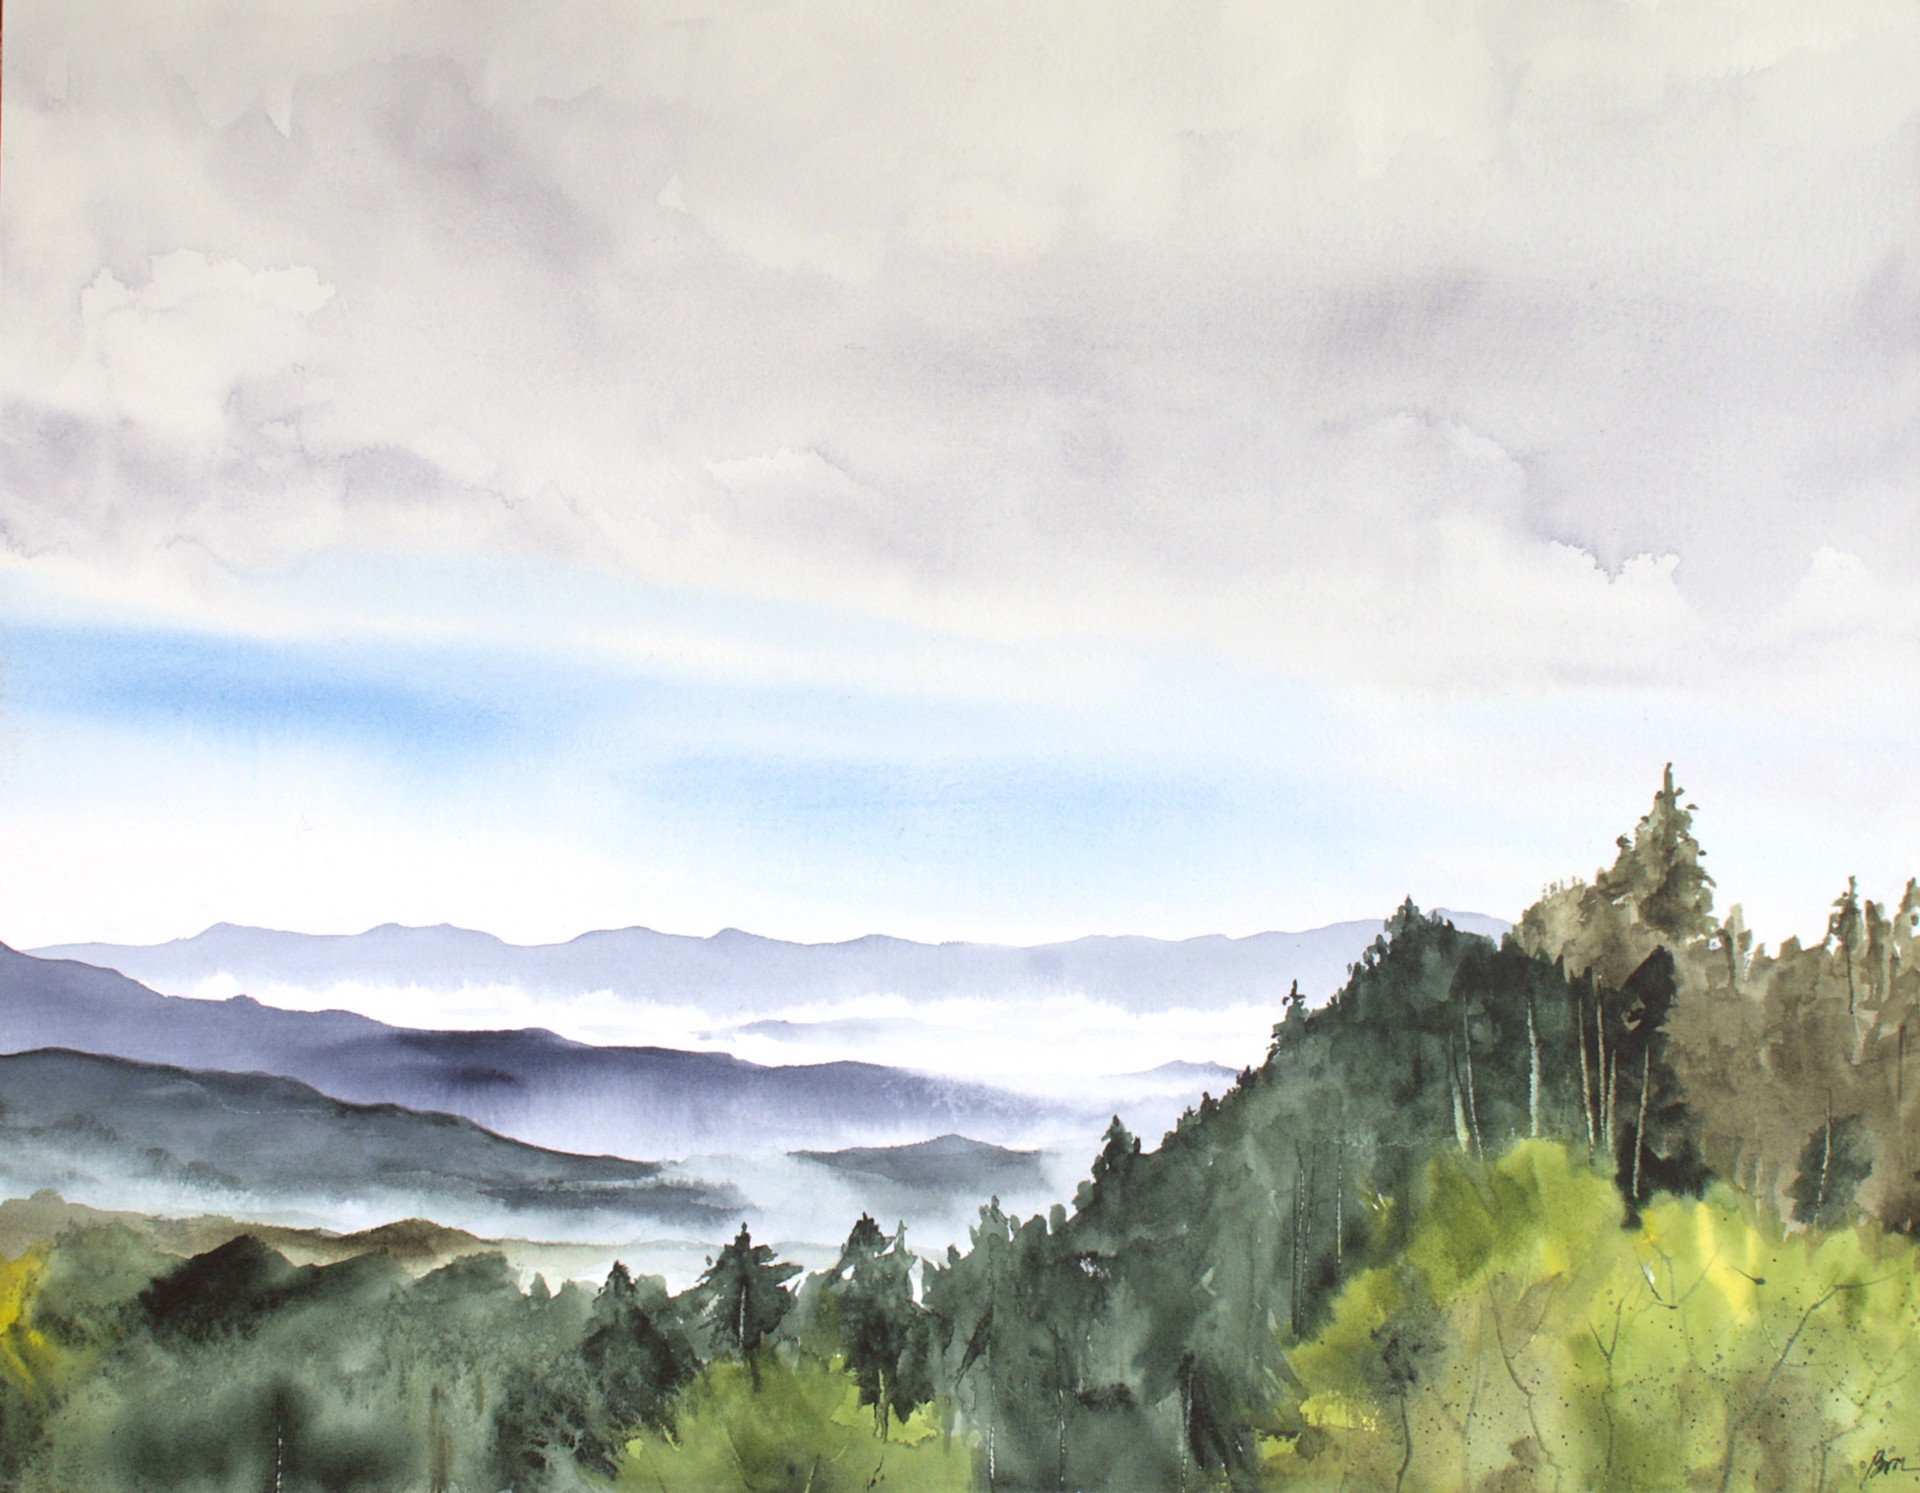 Mist on the Mountains by Bronwen McCormick